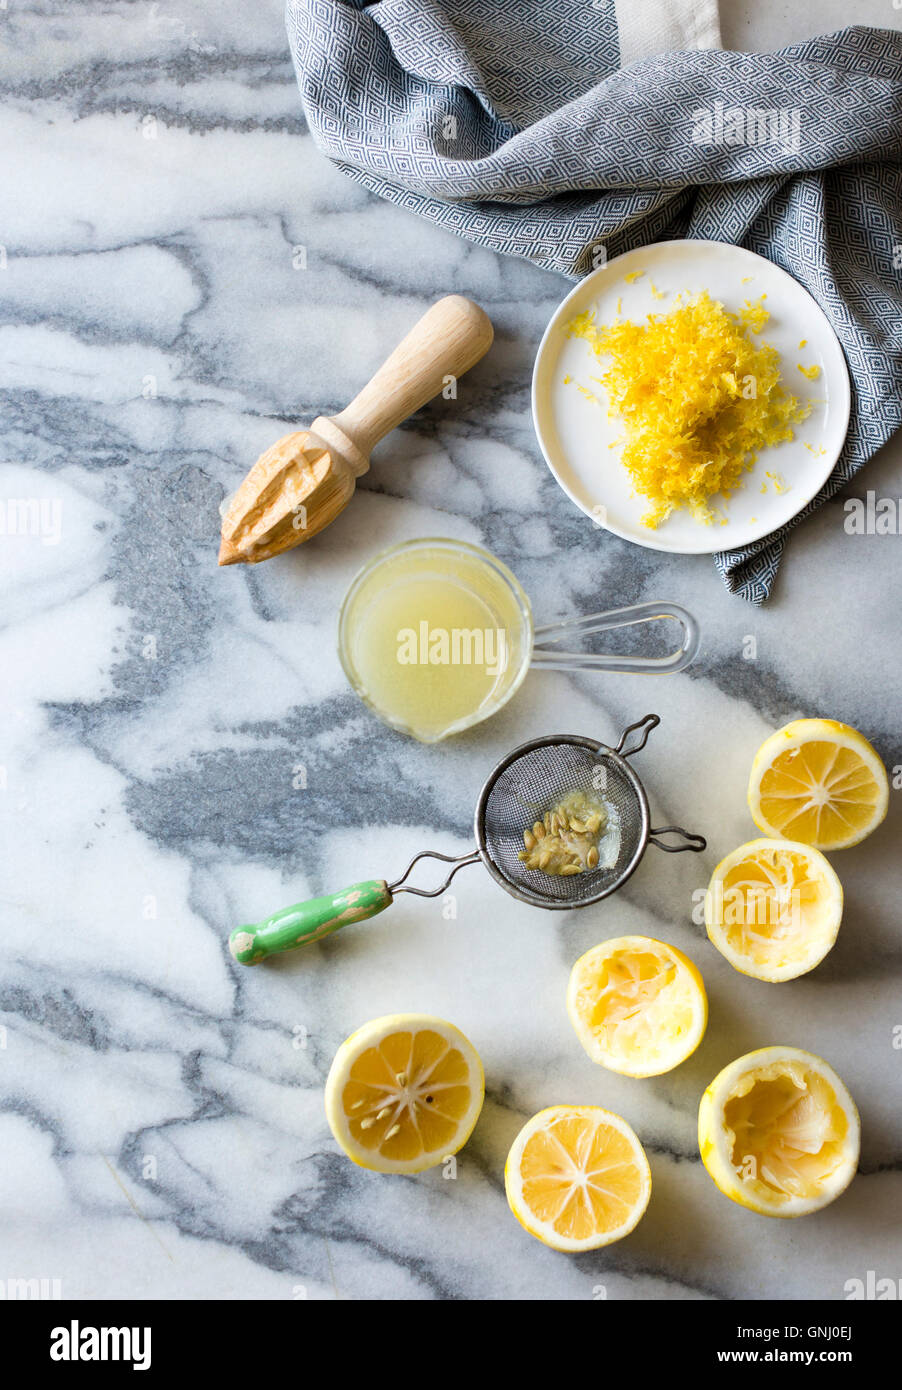 Lemons for cooking. Juiced, grated, de-pipped, with seive and juicer. Stock Photo